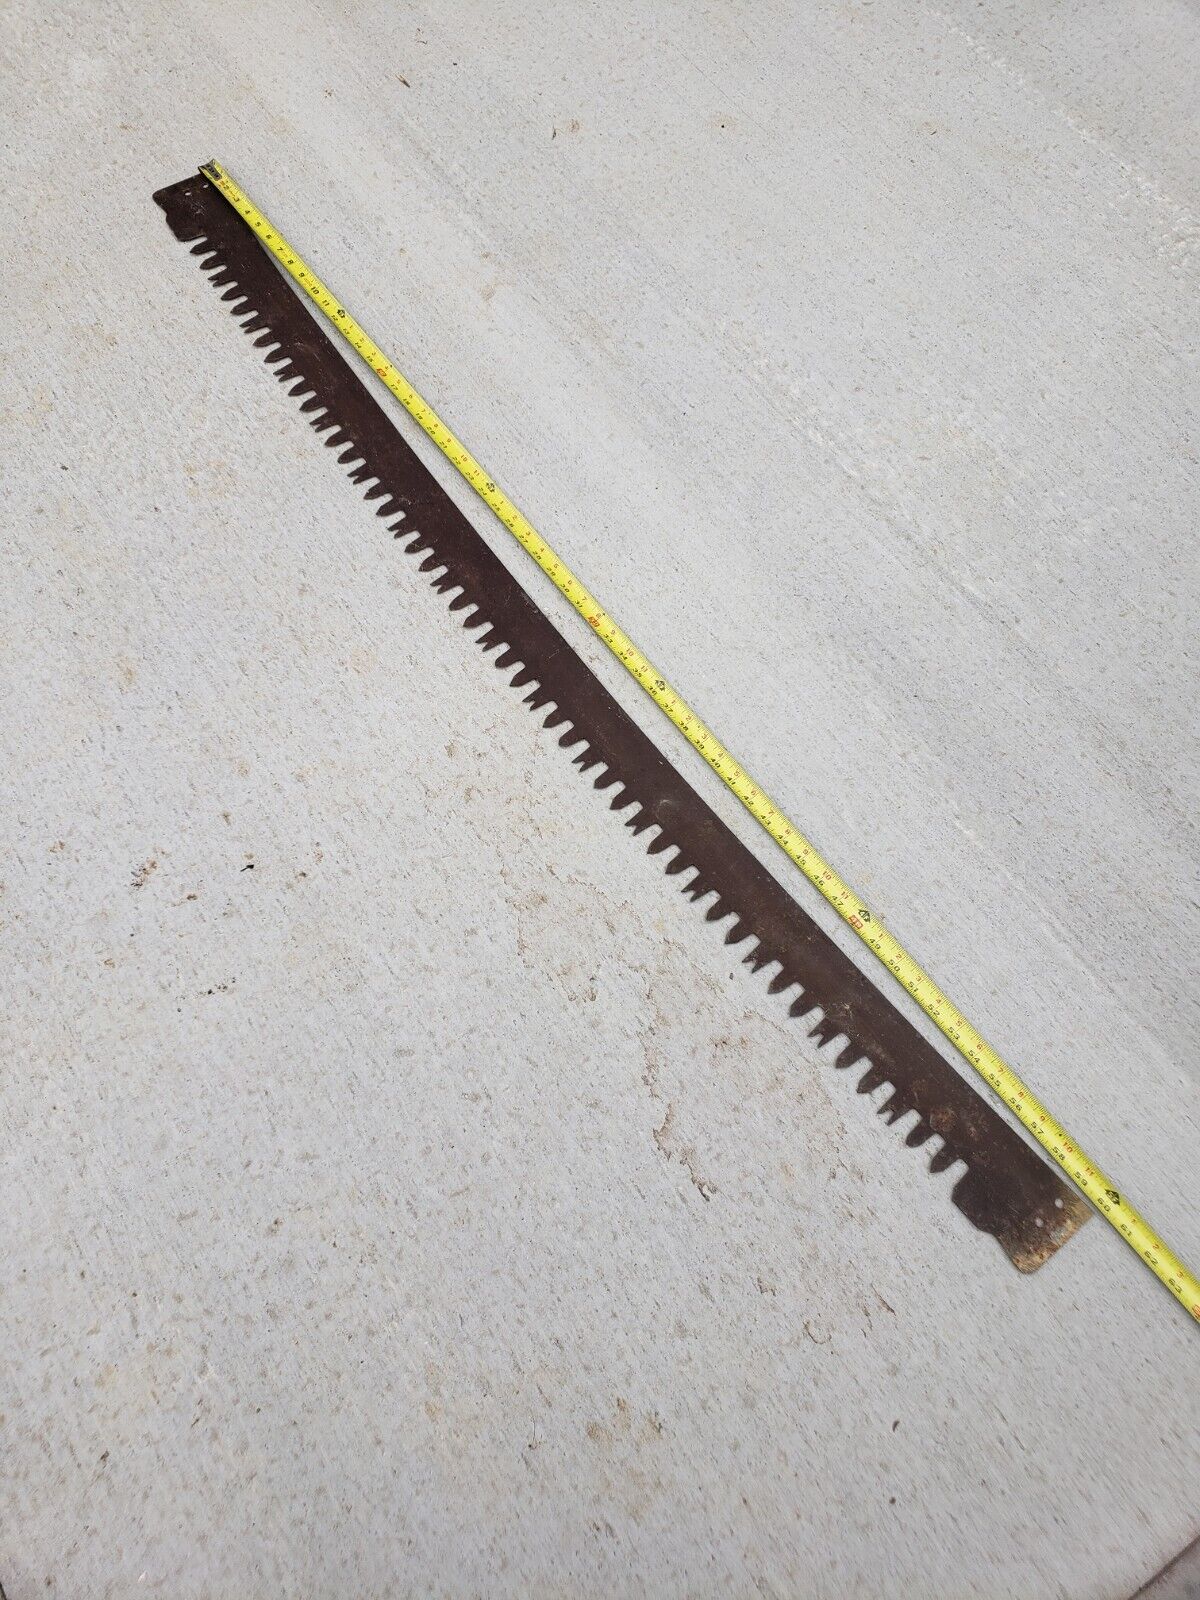 Vintage 2 Man Crosscut Logging Saw Blade In Good Used Condition 60 inches long